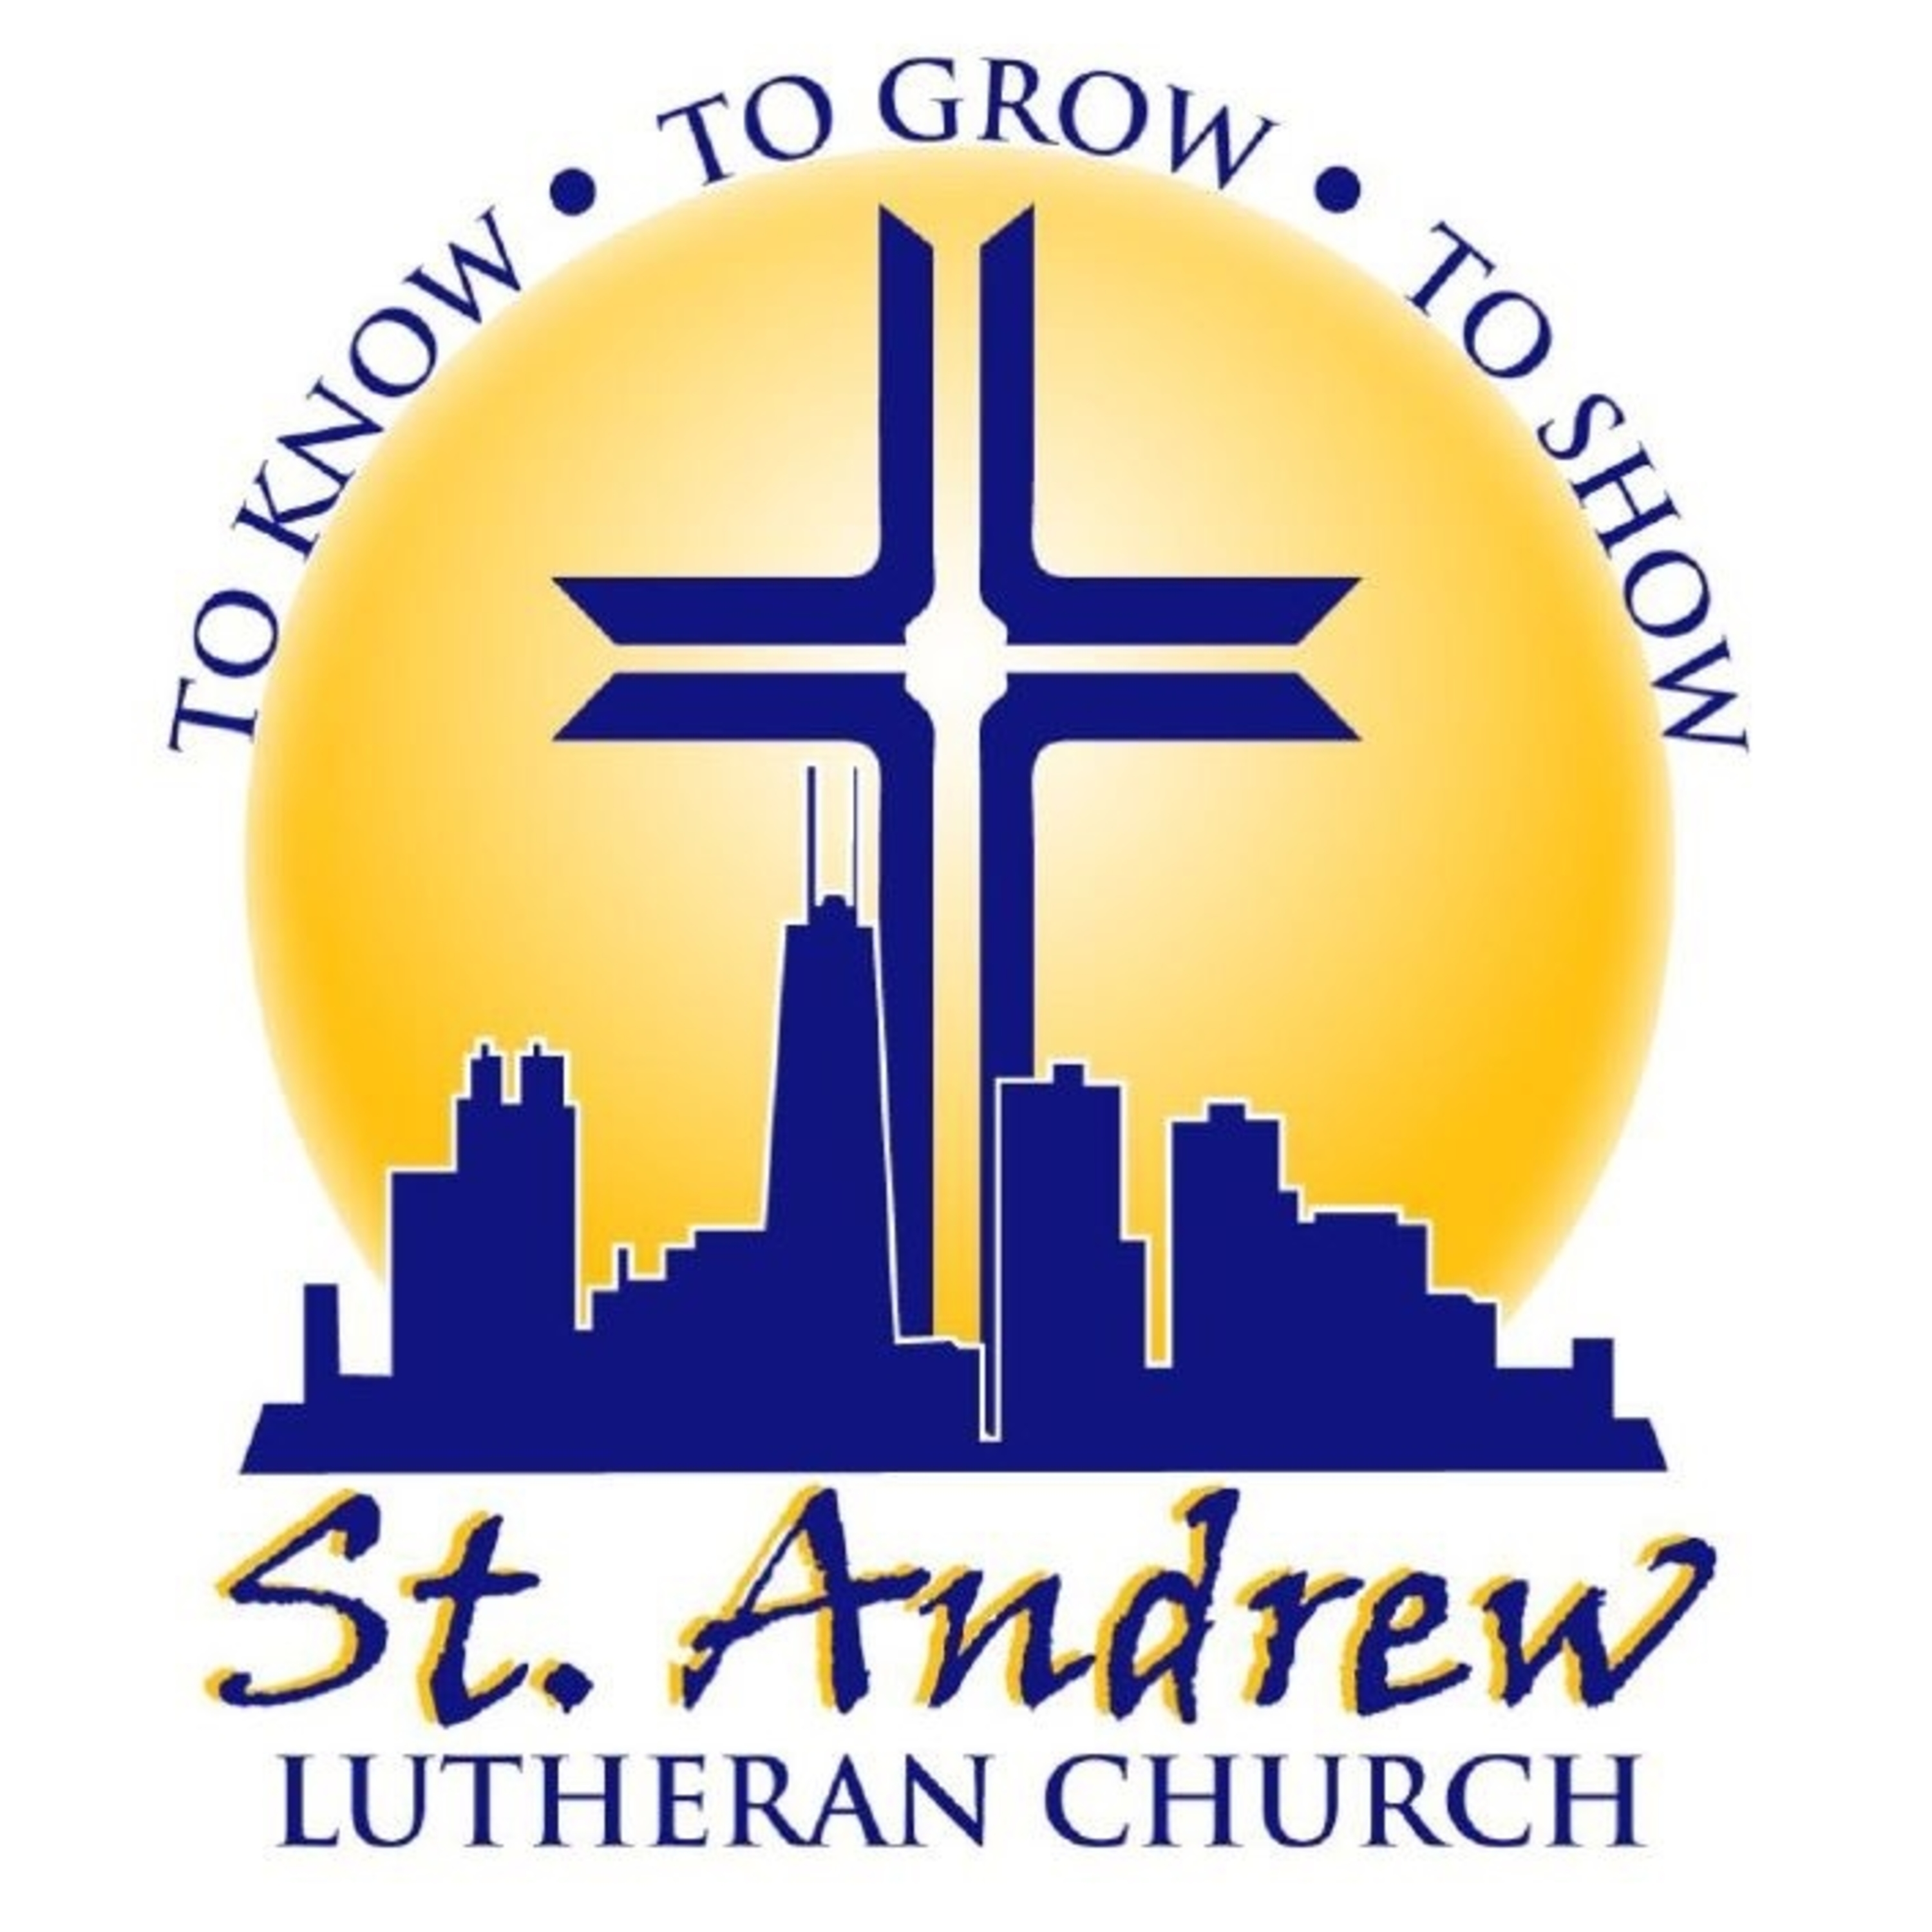 St. Andrew Lutheran Church, Chicago IL - WELS